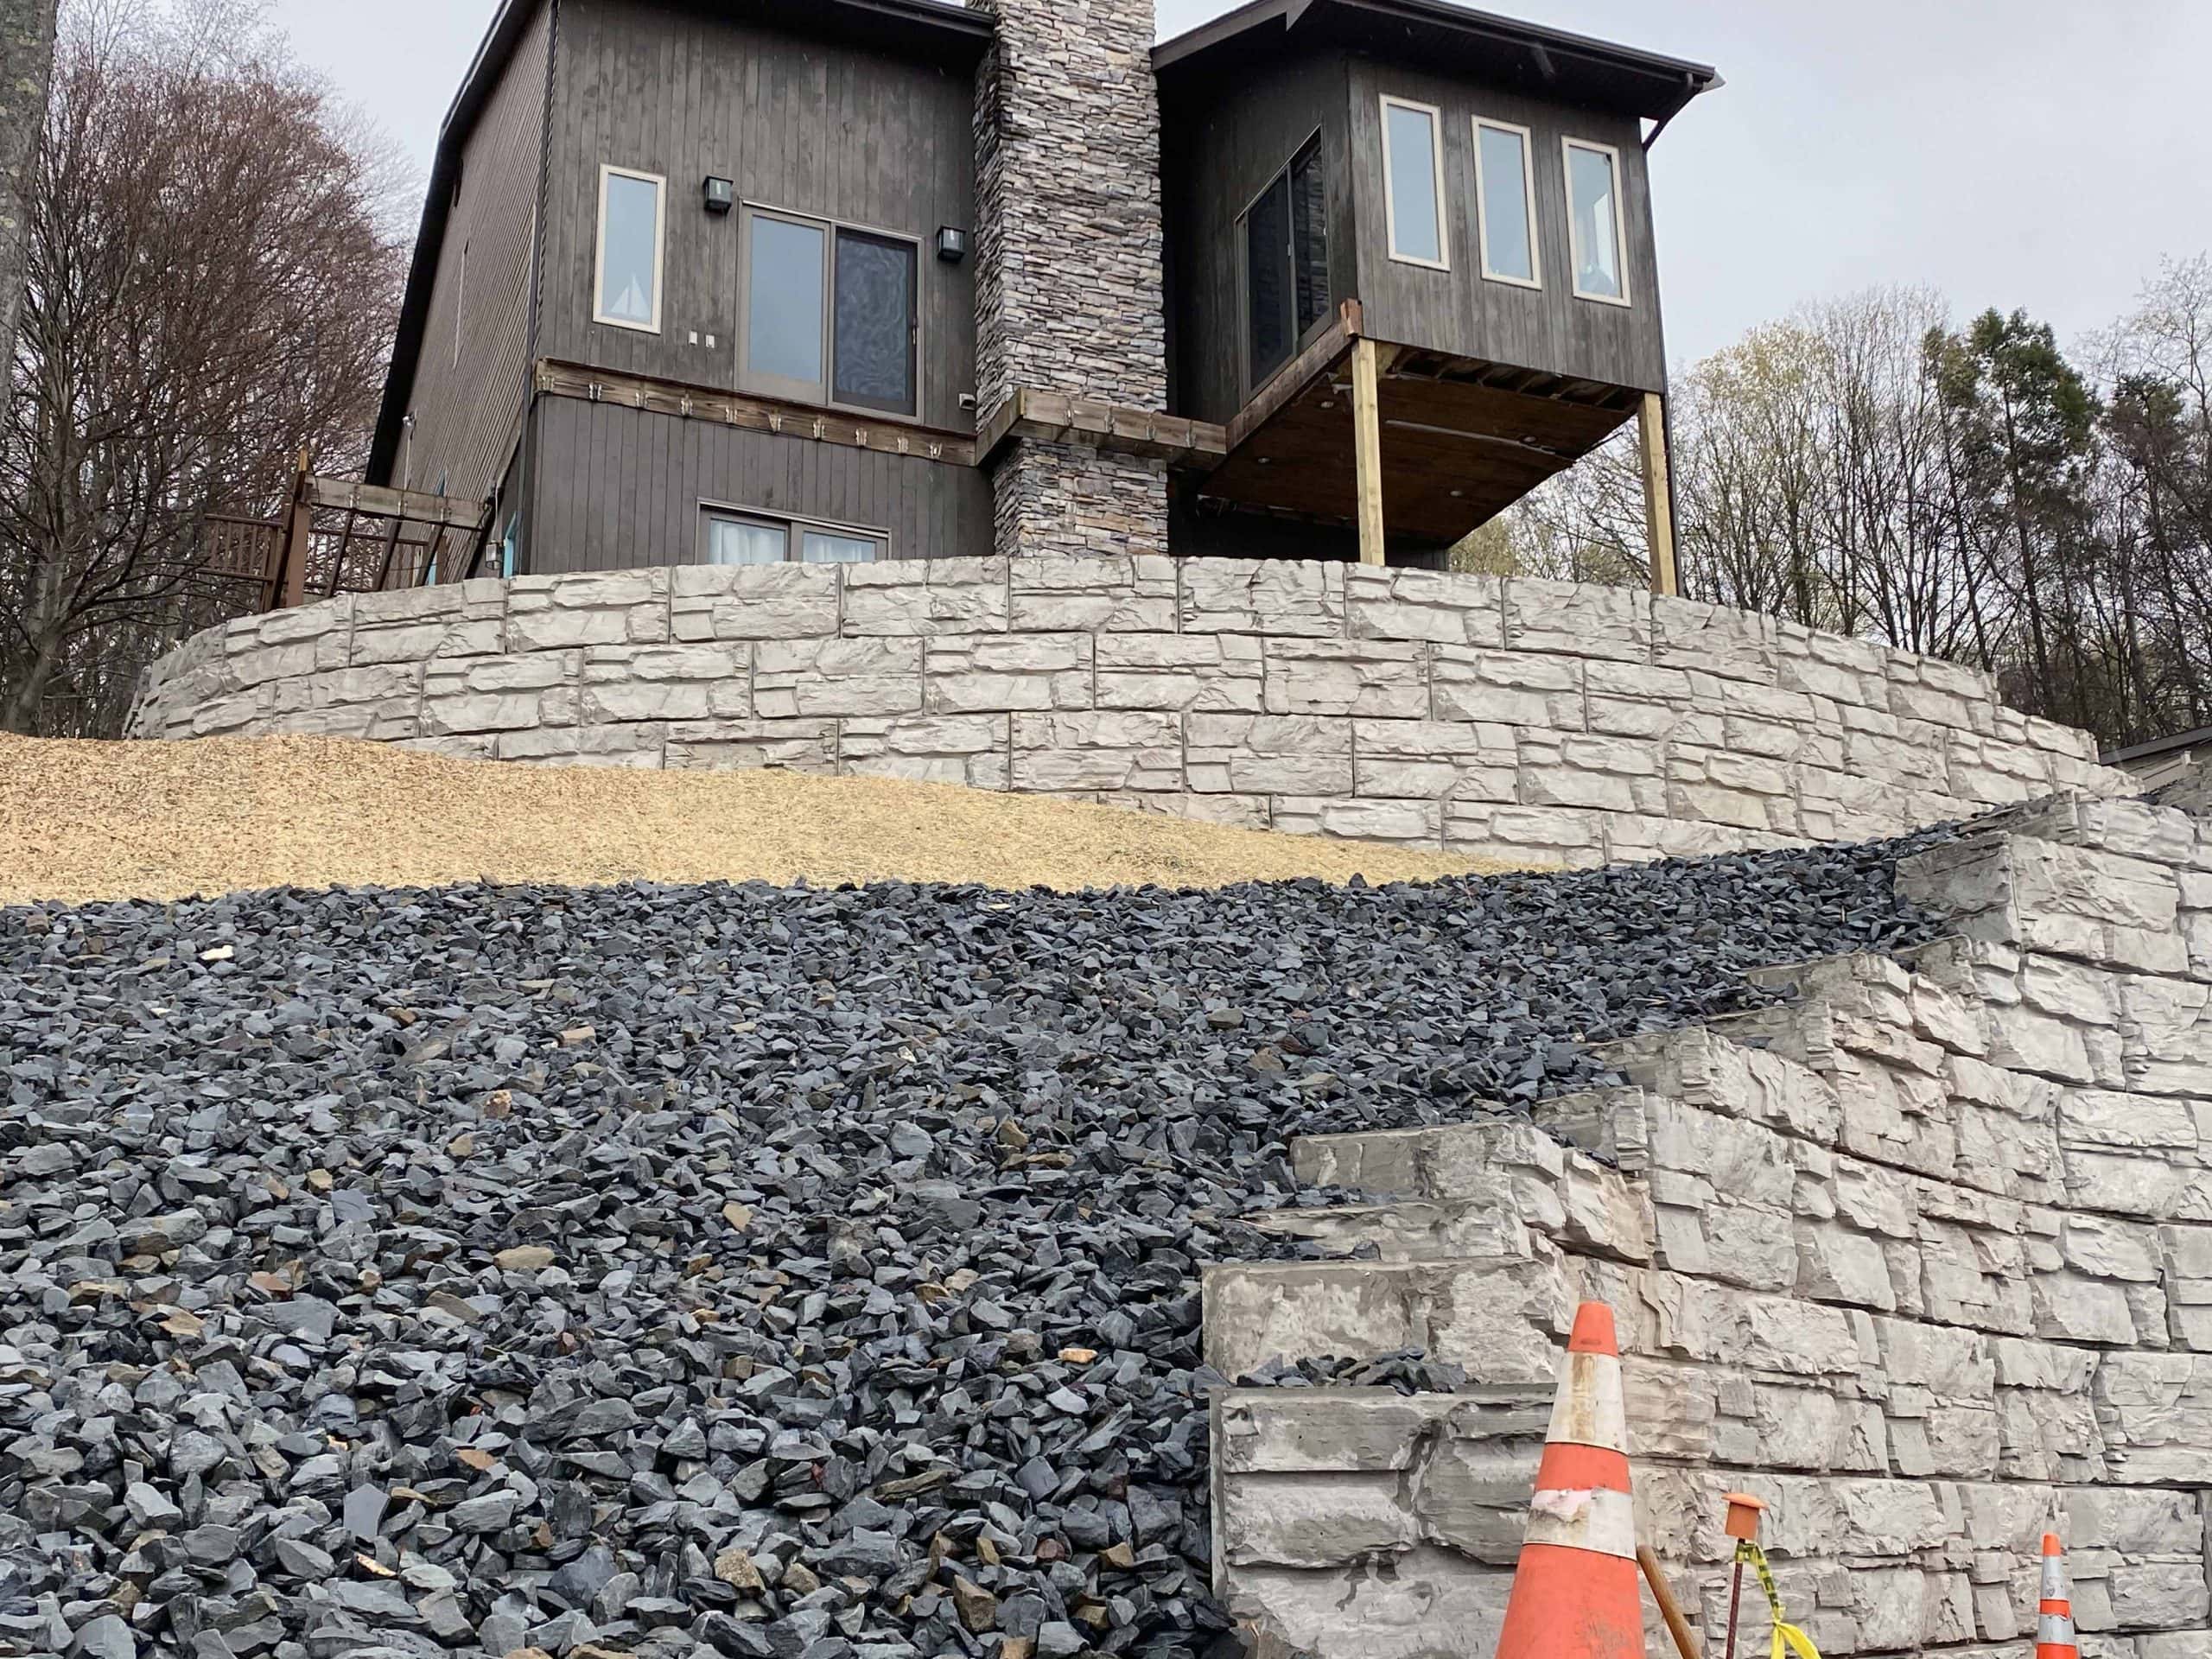 MagnumStone blocks build curved driveway for lakeside home.